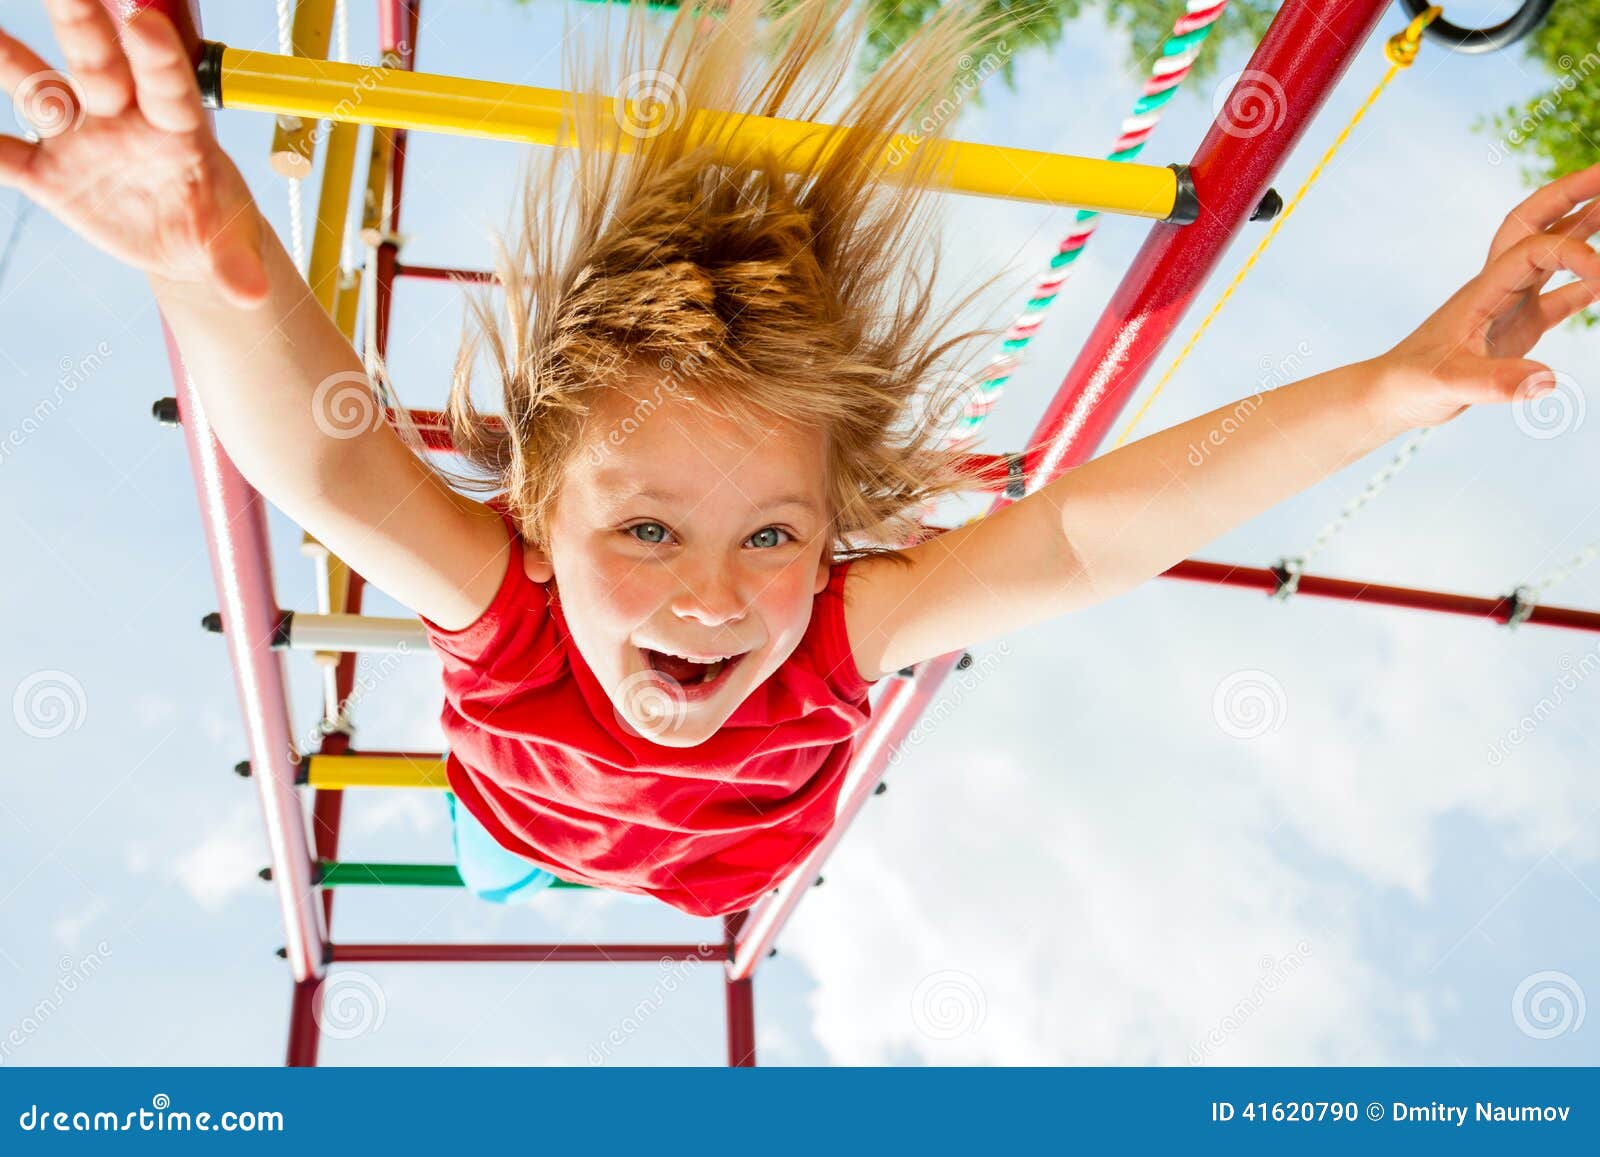 Happy Child on a Jungle Gym Stock Photo - Image of gripping, hang: 41620790